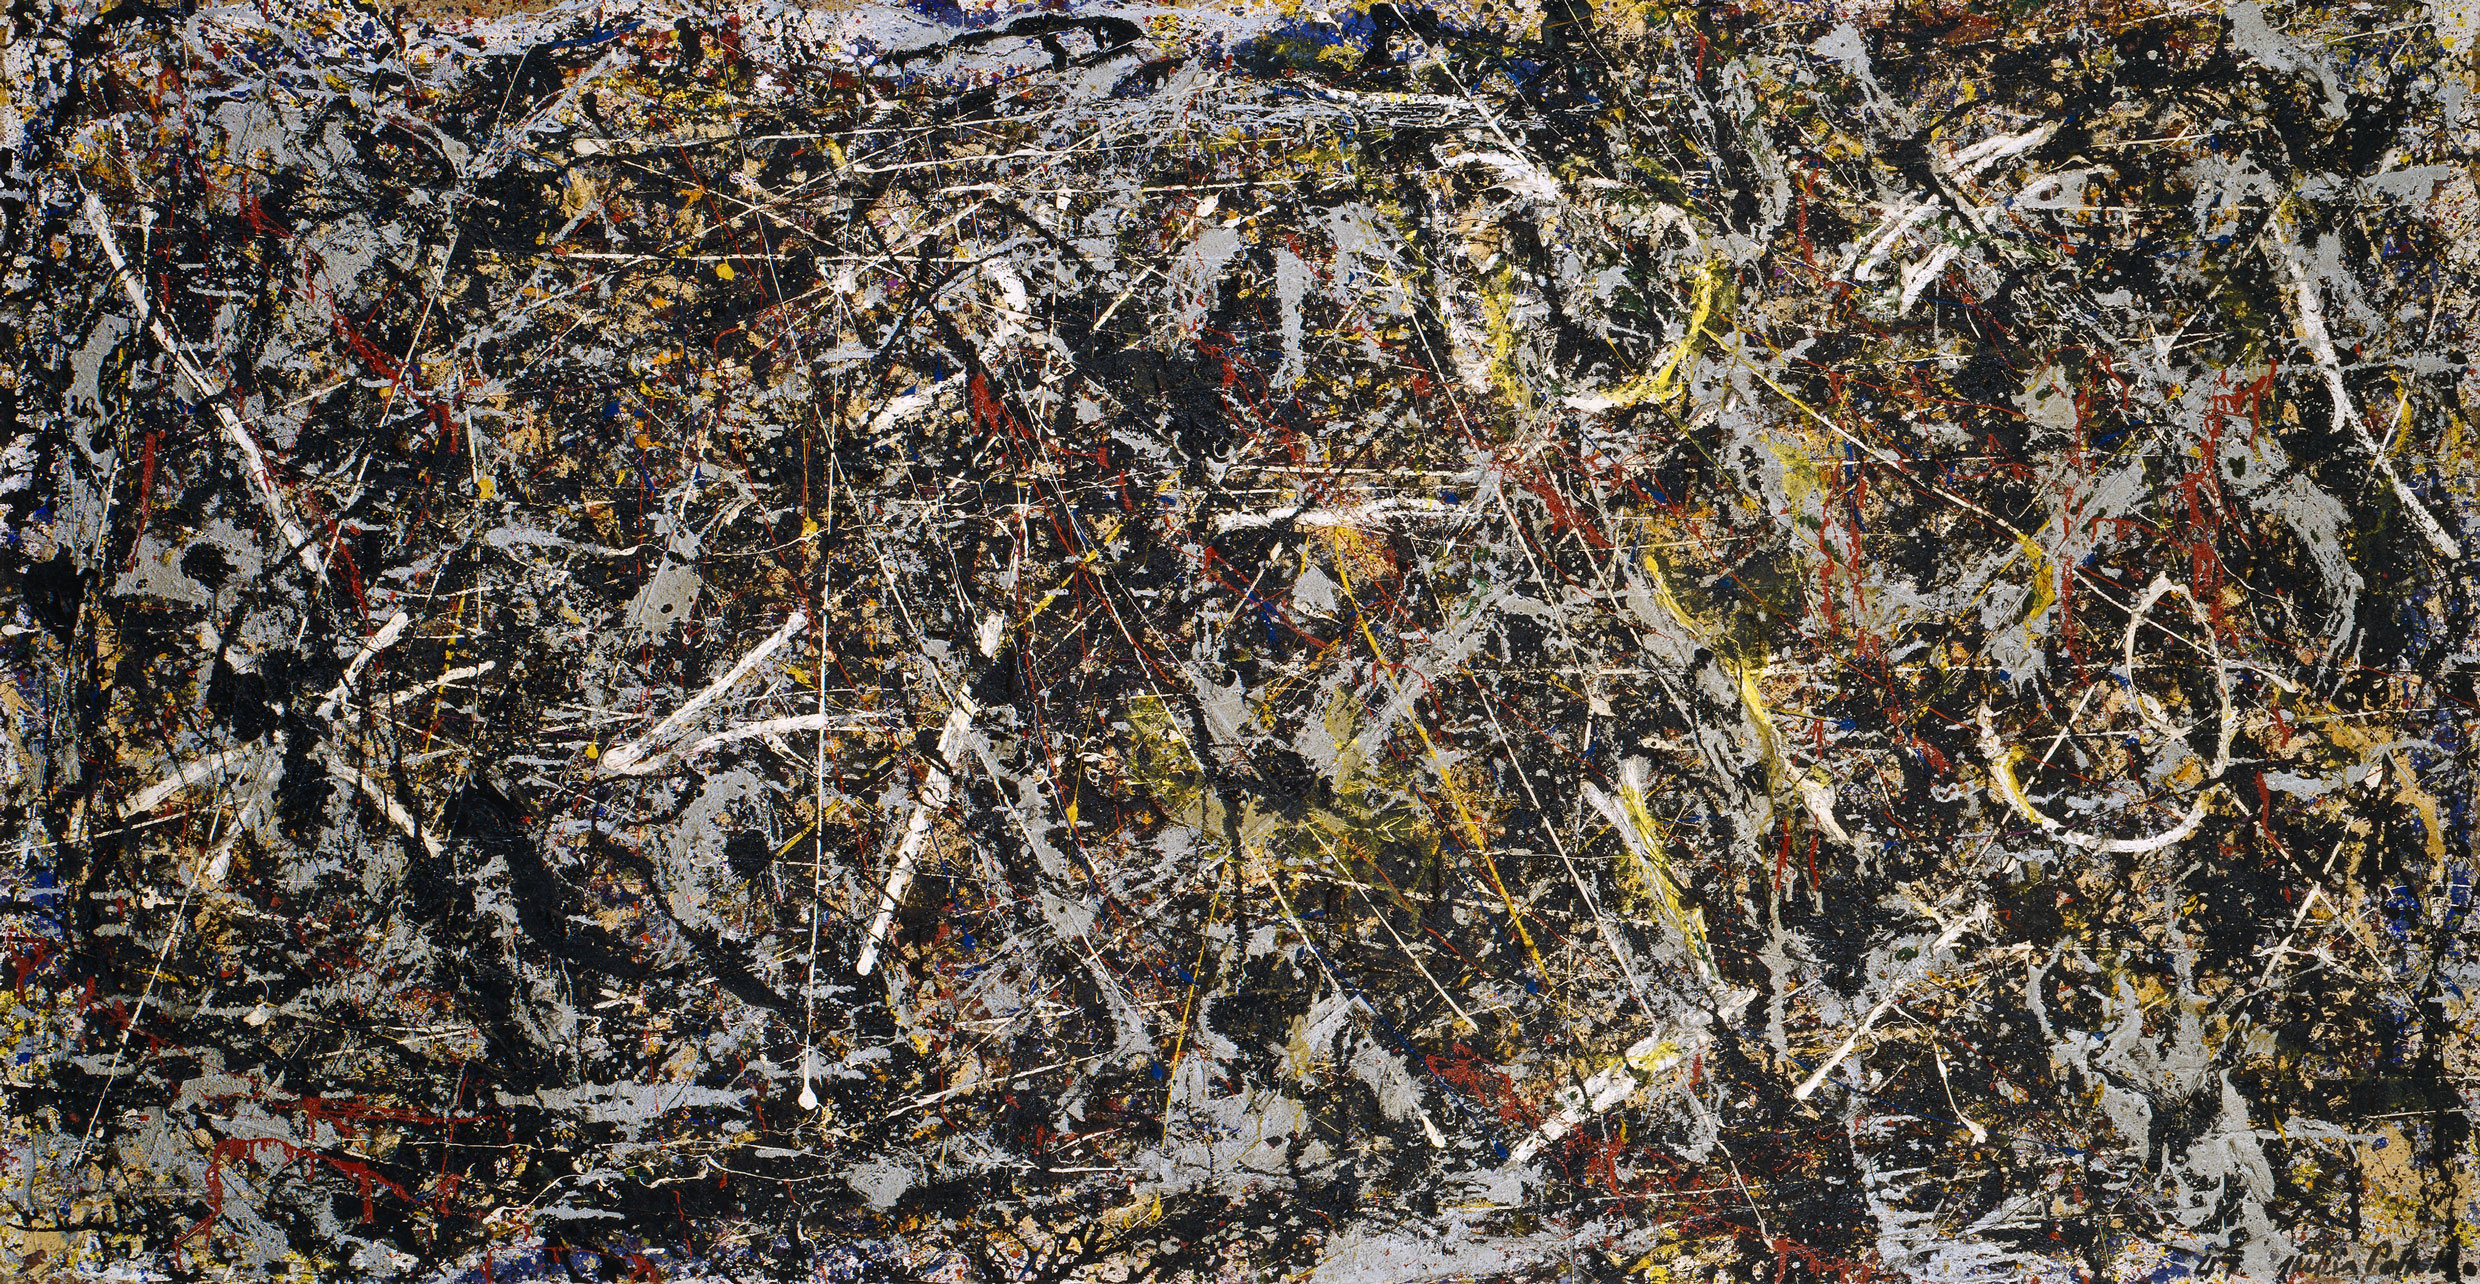 Jackson Pollock, Alchemy, 1947 The Guggenheim Museums and Foundation